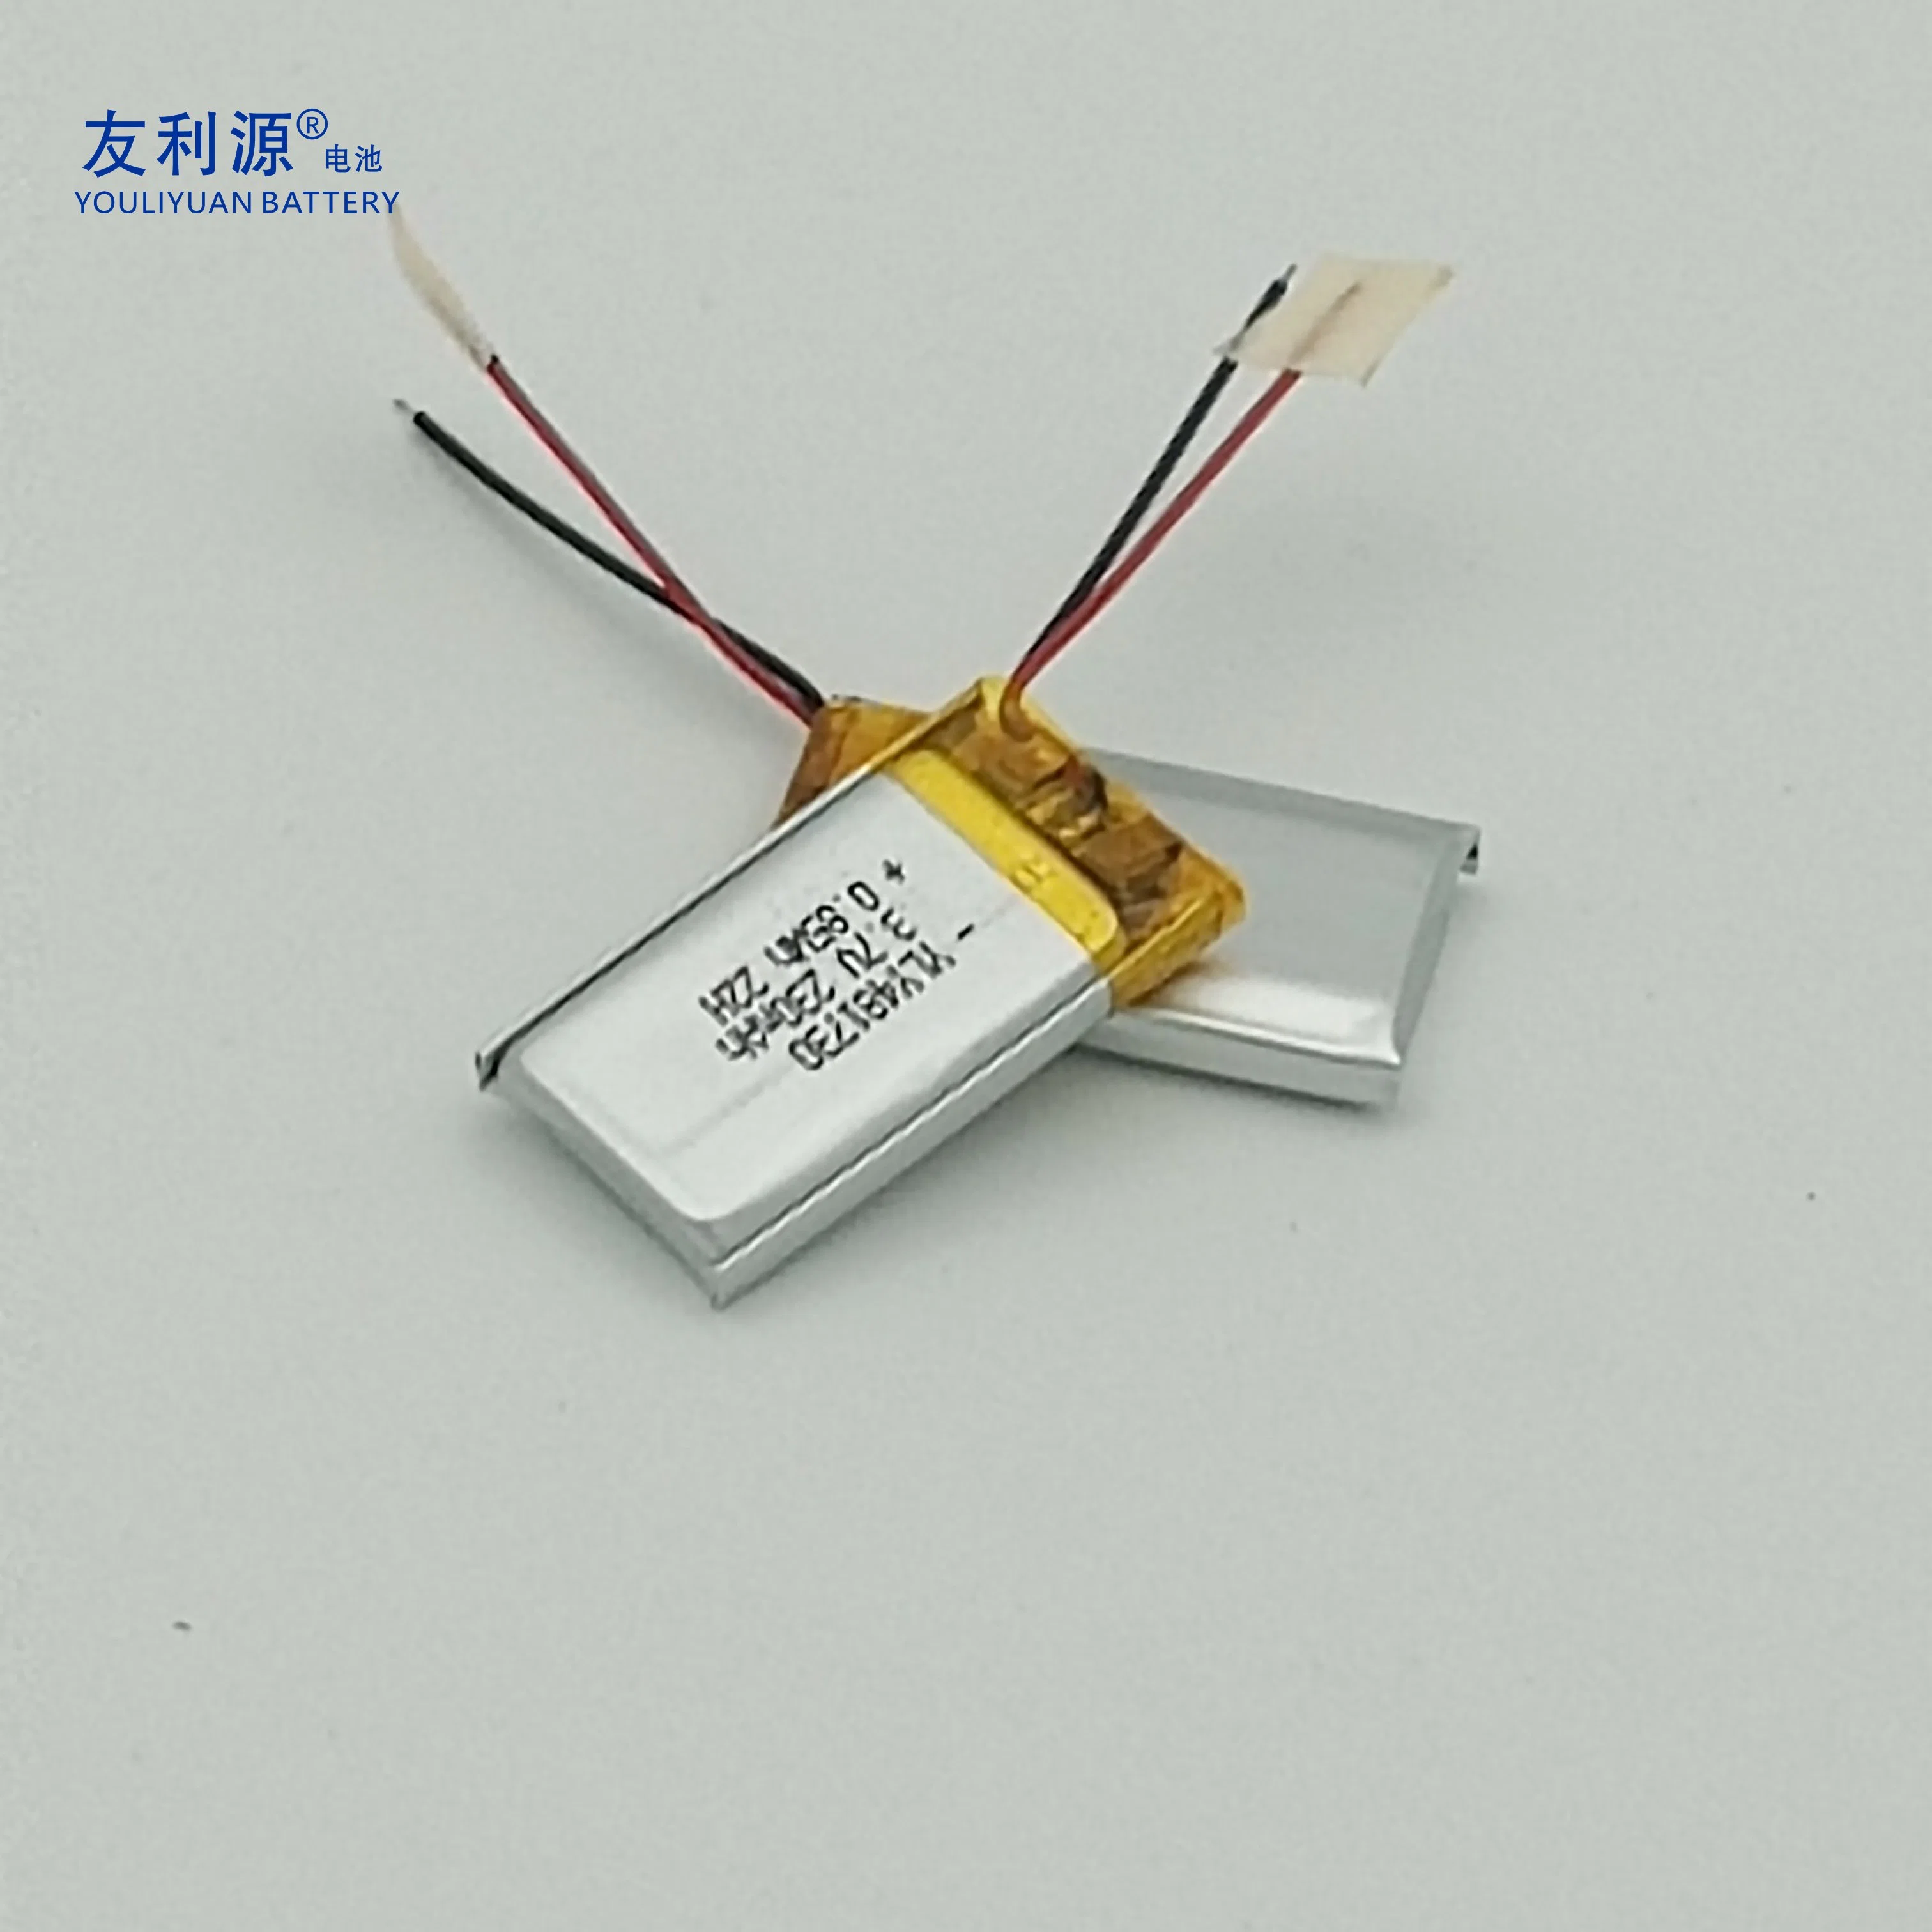 OEM ODM Factory Rechargeable Lipo Battery 481730 3.7V 230mAh Mini Lithium Polymer Battery for Bluetooth Earphone/Water Repienisher